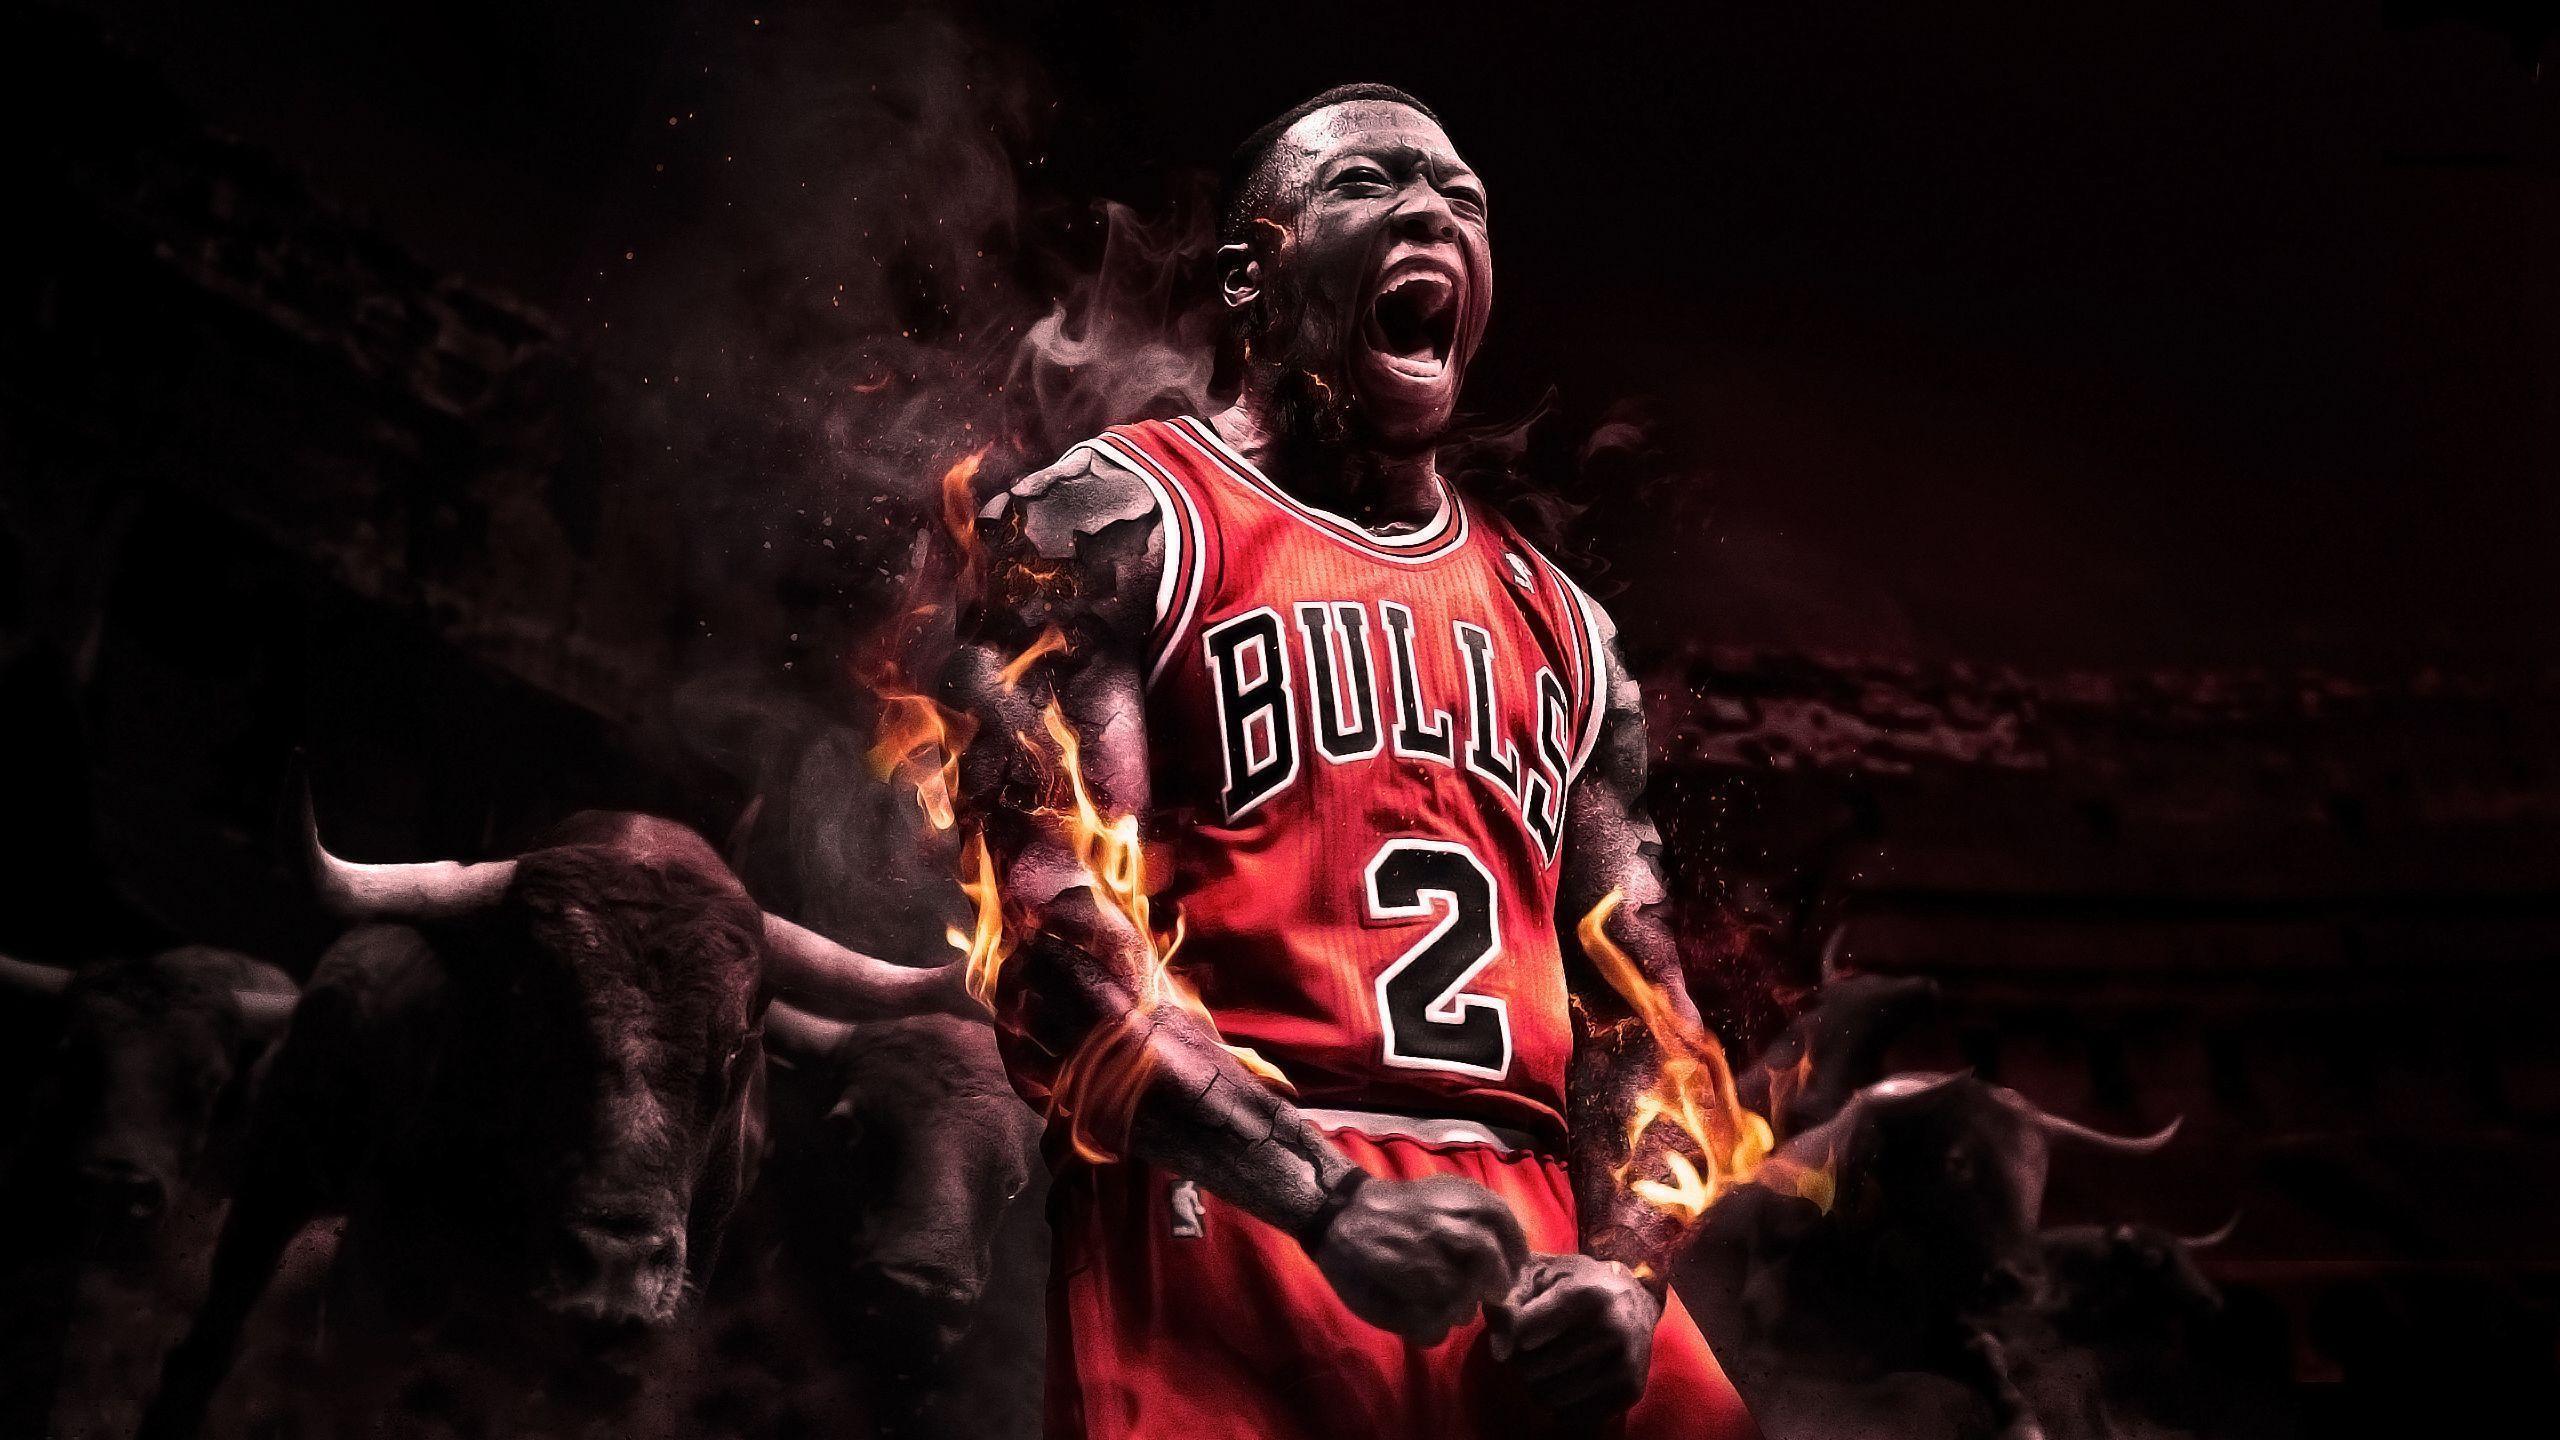 Collection of Basketball Player Wallpaper on HDWallpaper